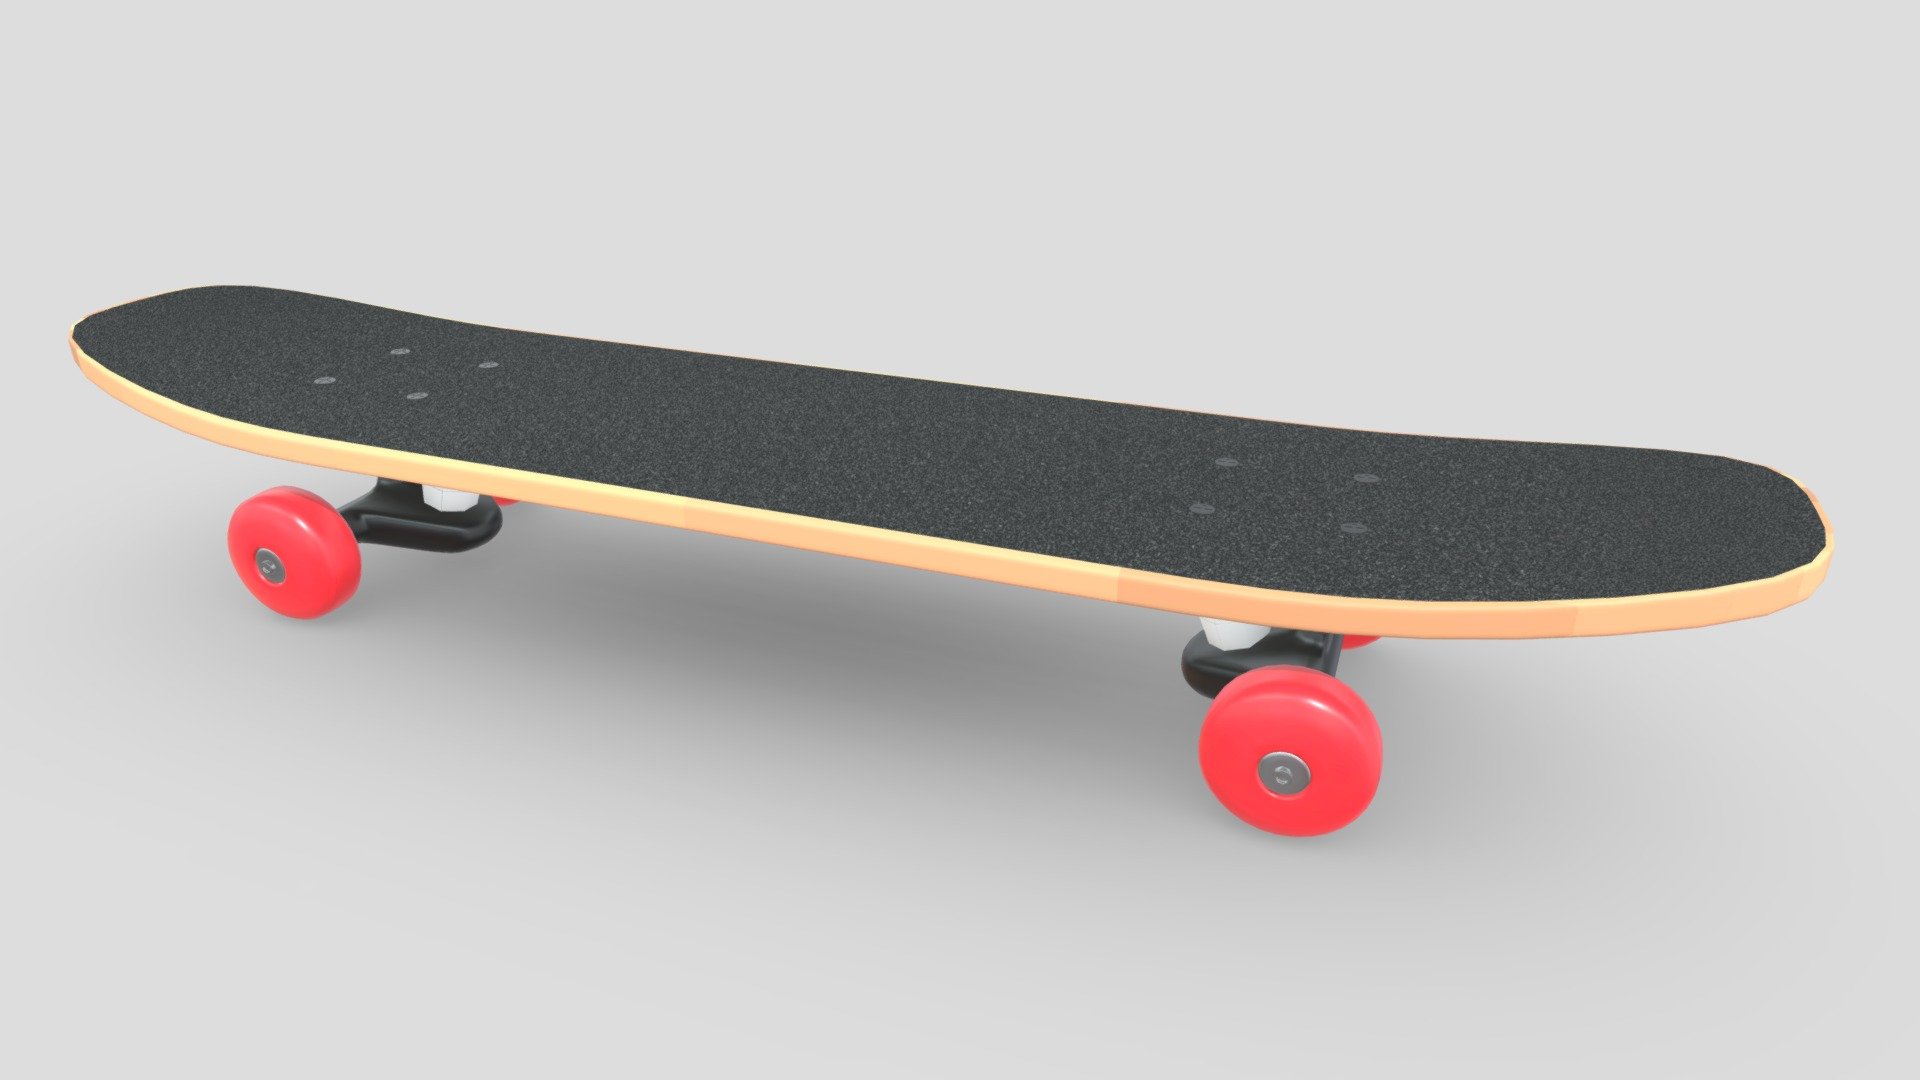 Wooden Skateboard that I have created using Blender. The textures for this model were created procedurally and then baked into PBR textures. There are 3 diffuse textures for 3 different types of wood undersides. Also included is an extra normal map for the underside of diffuse 3 texture.

Features:


Uses metalness workflow and 4K PBR textures in PNG format
Optional diffuse textures to customize the underside wood of the model
Included normal maps to add extra detail
Model has been manually unwrapped to match its PBR textures
Overlapping UVs on mirrored/duplicate meshes to save texture space
Blend file includes pre-applied textures
Model has been exported in 3 file formats (FBX, OBJ, DAE/Collada)

Included Textures:


AO, Diffuse, Roughness, Gloss, Metallic, Normal
UVLayout

The source file that is uploaded is for demonstration use and is uploaded in FBX format. In the additional file you will find all model exports and the textures that go along with them 3d model